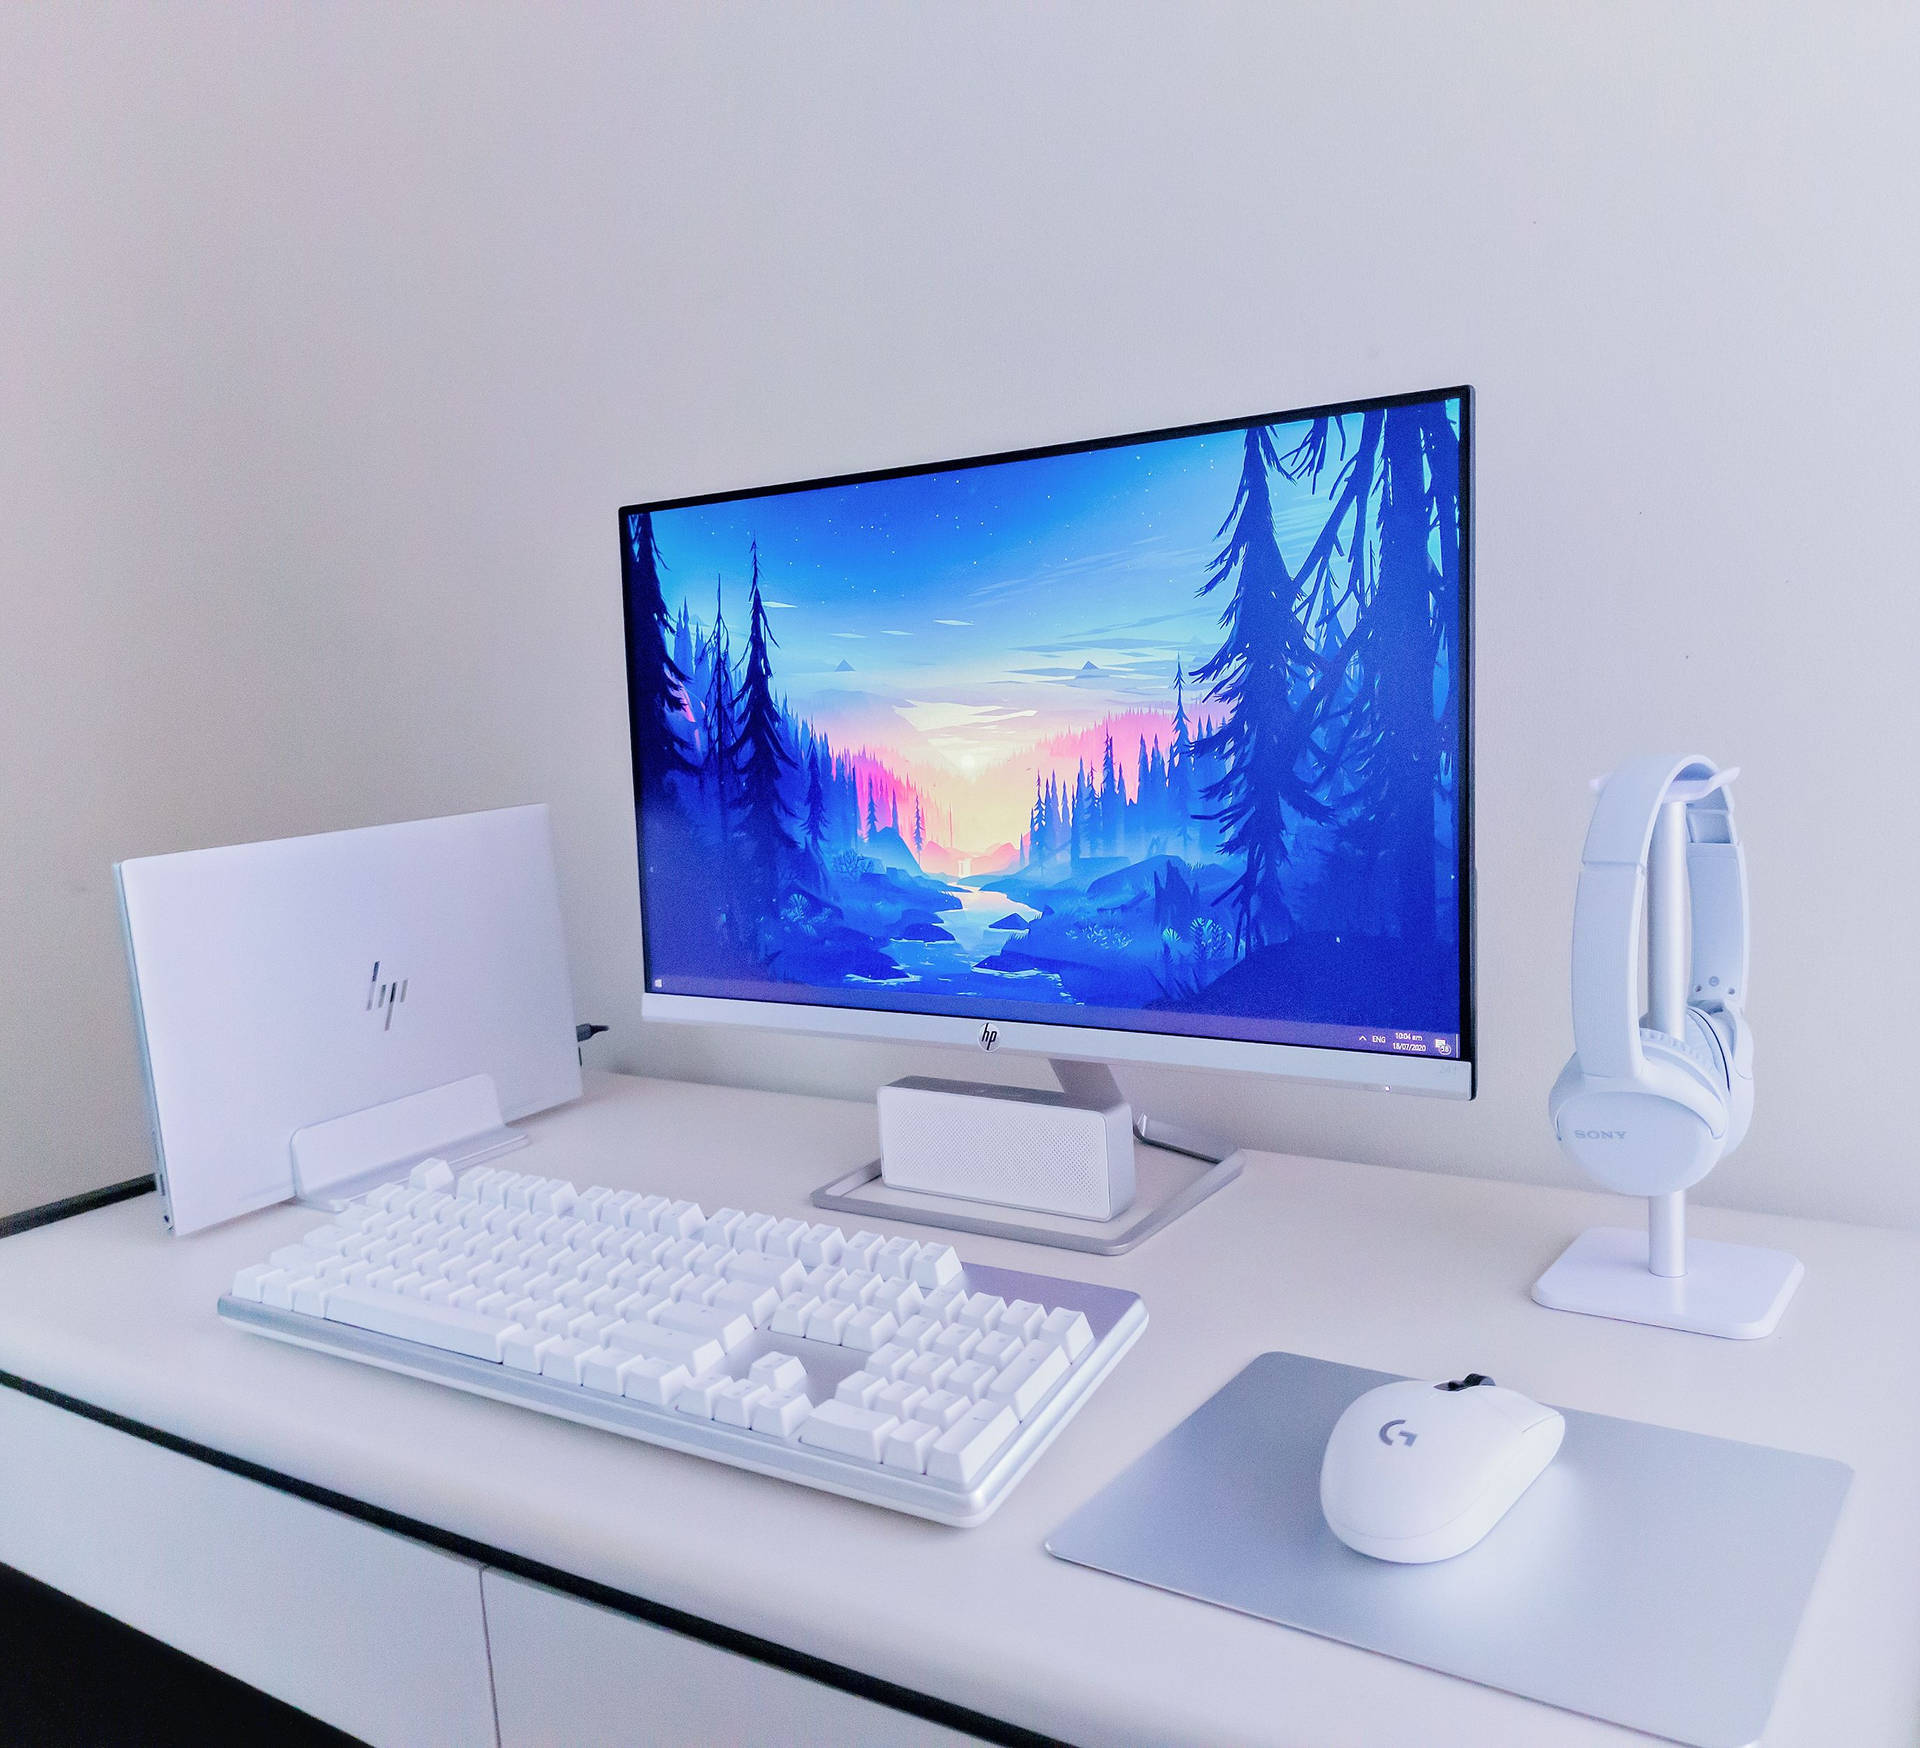 The White Pc - a sleek design for powerful performance Wallpaper